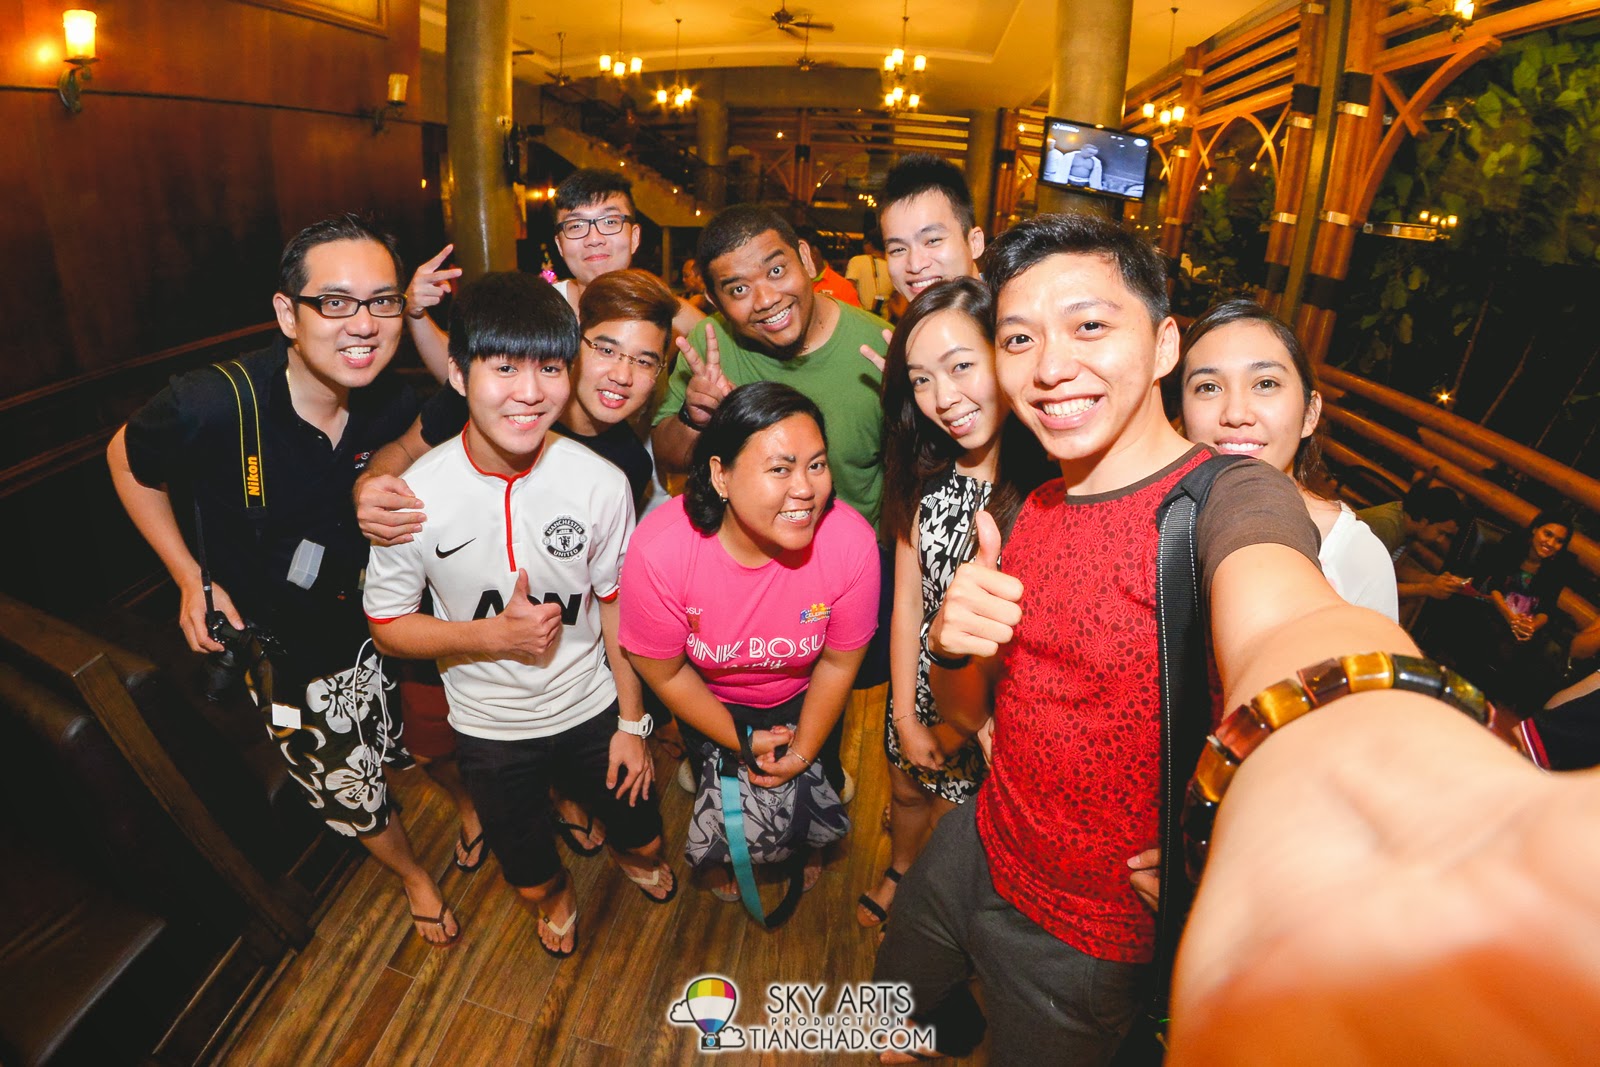 A selfie with blogger friends who staying at Philea Resort =) It was nice meeting you guys and chit-chat after so long!